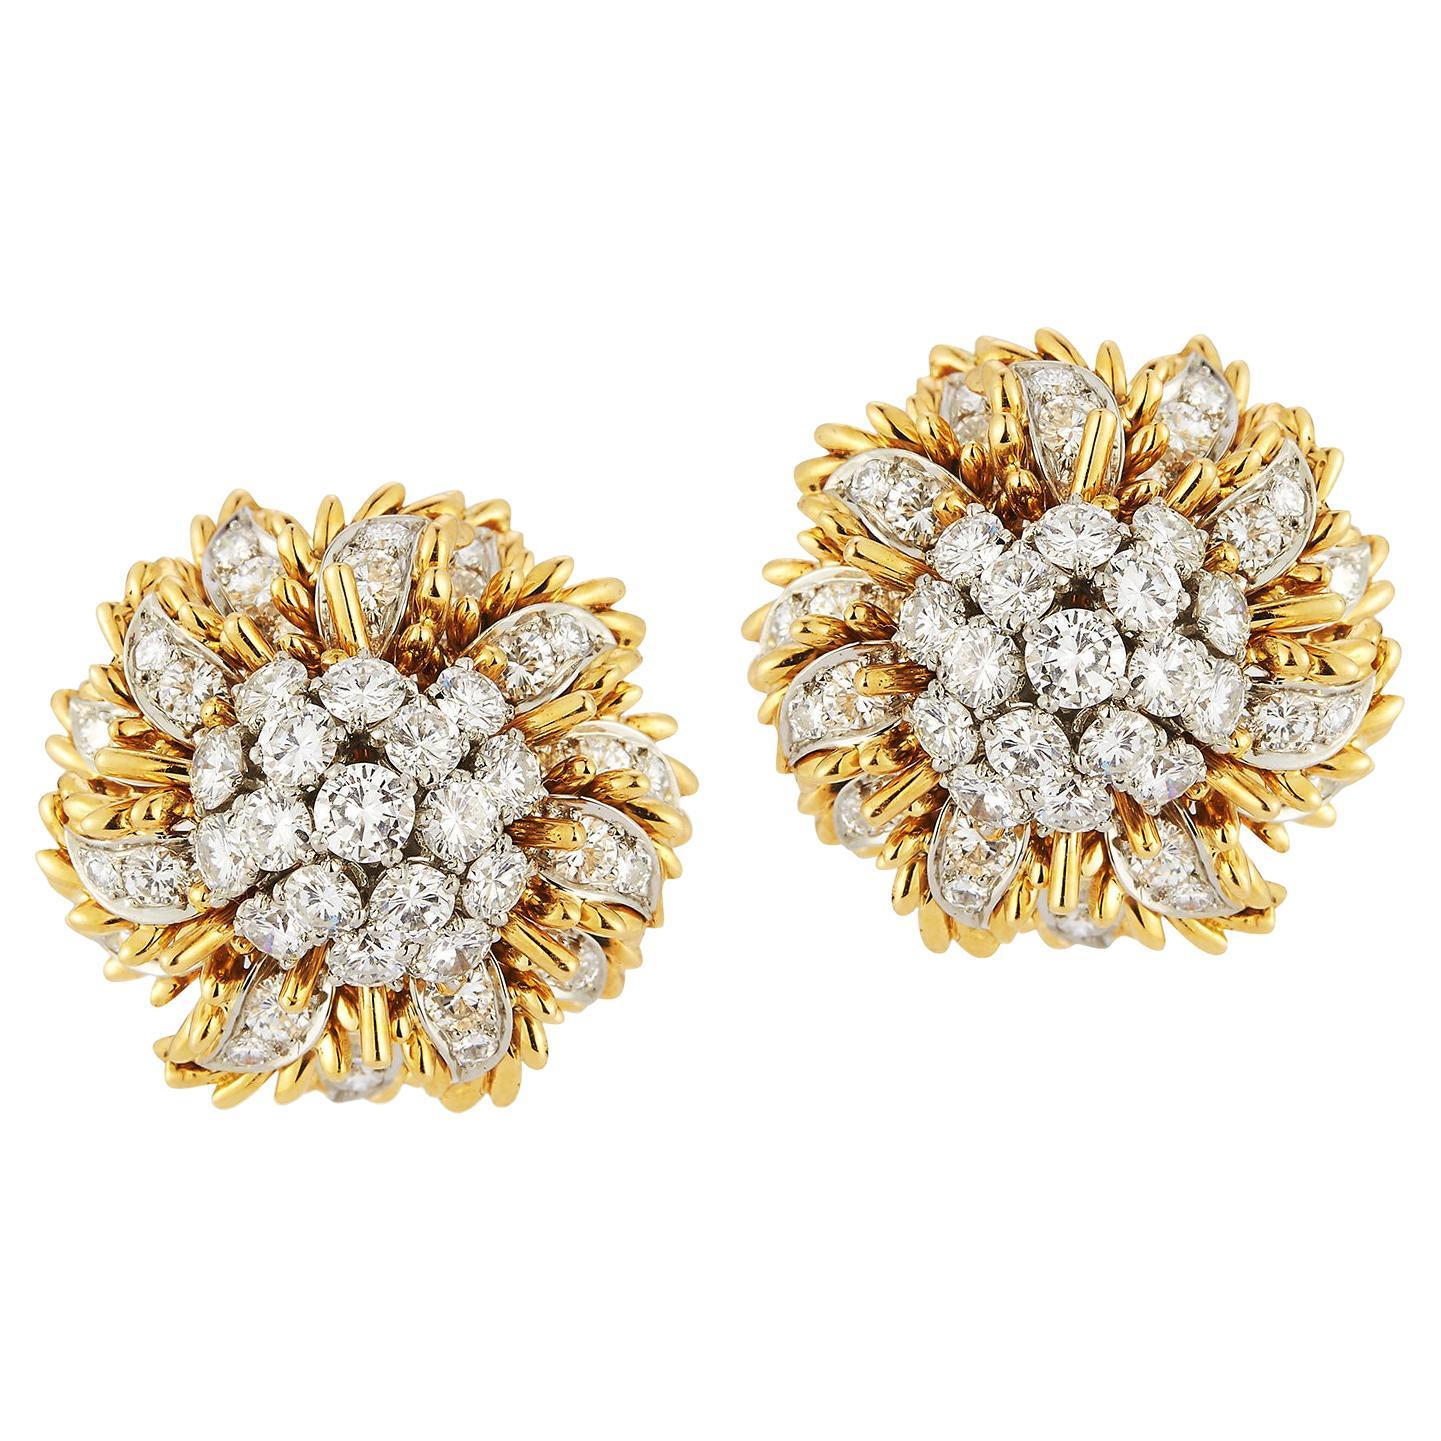 Tiffany and Co. Diamond Gold Pave Flower Earrings at 1stDibs